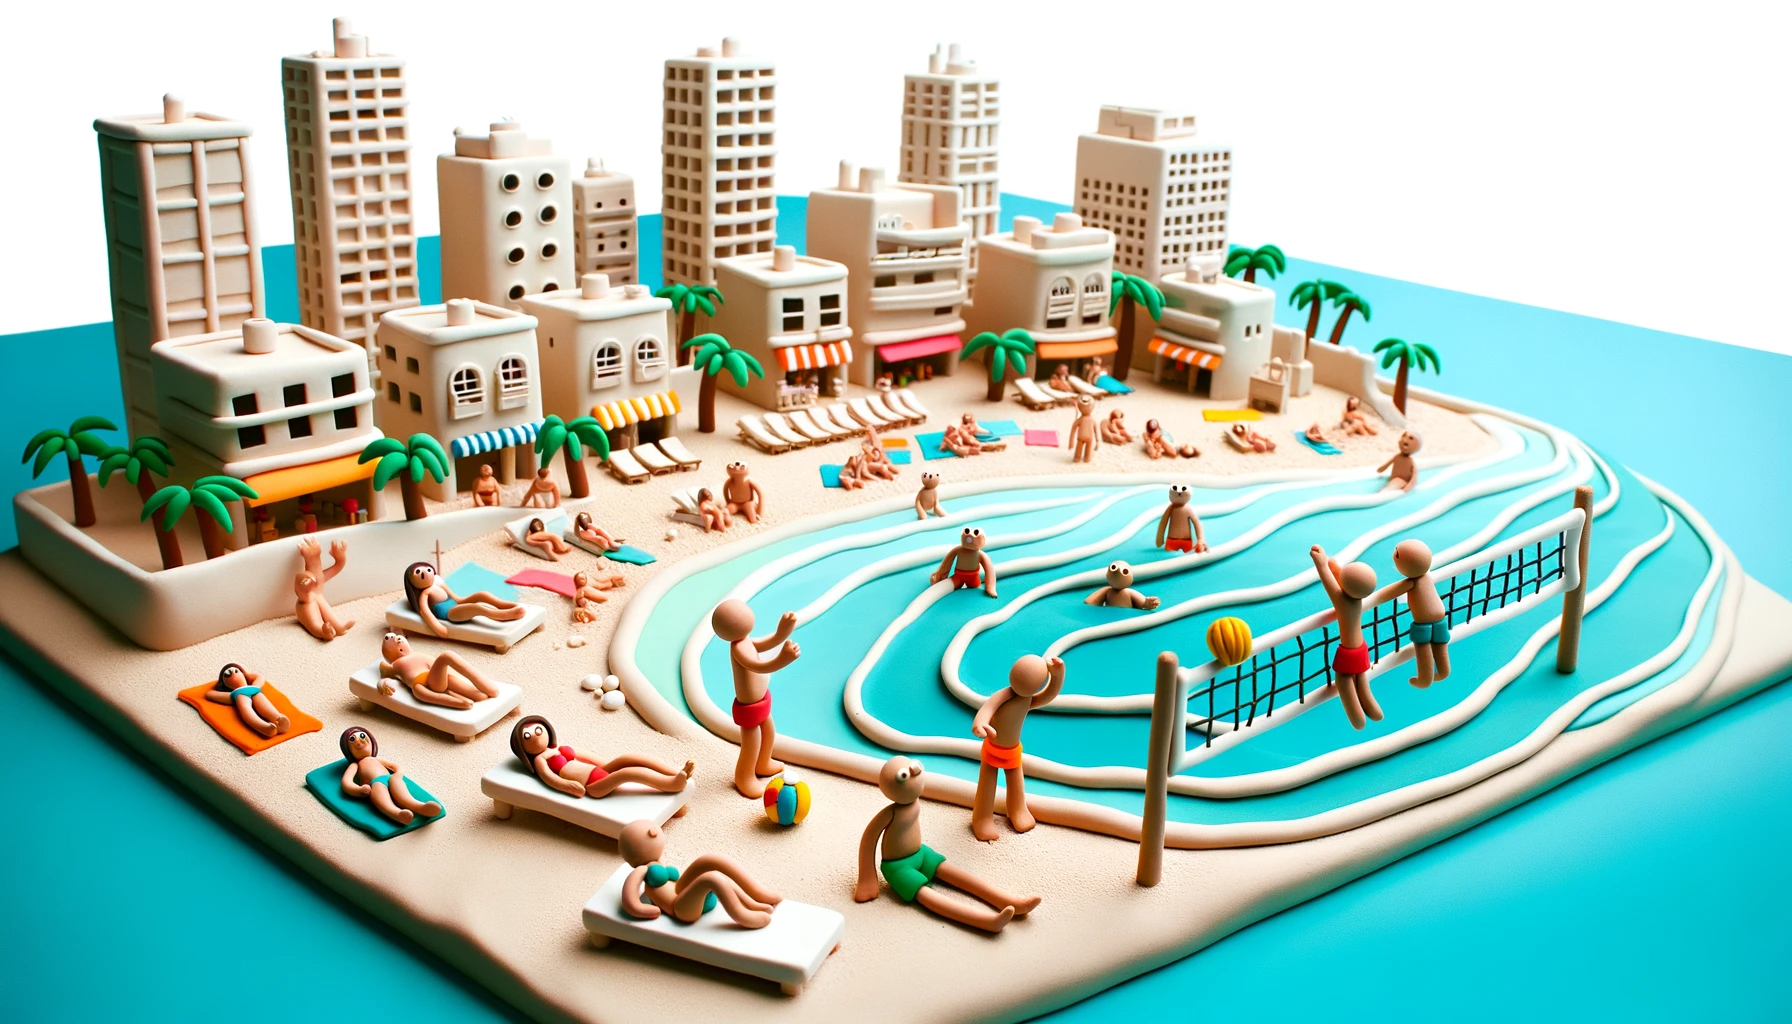 Illustration in playful claymation style on a white background, showing a serene beach setting in Tel Aviv, where clay characters are sunbathing, playing beach volleyball, and enjoying the Mediterranean Sea.